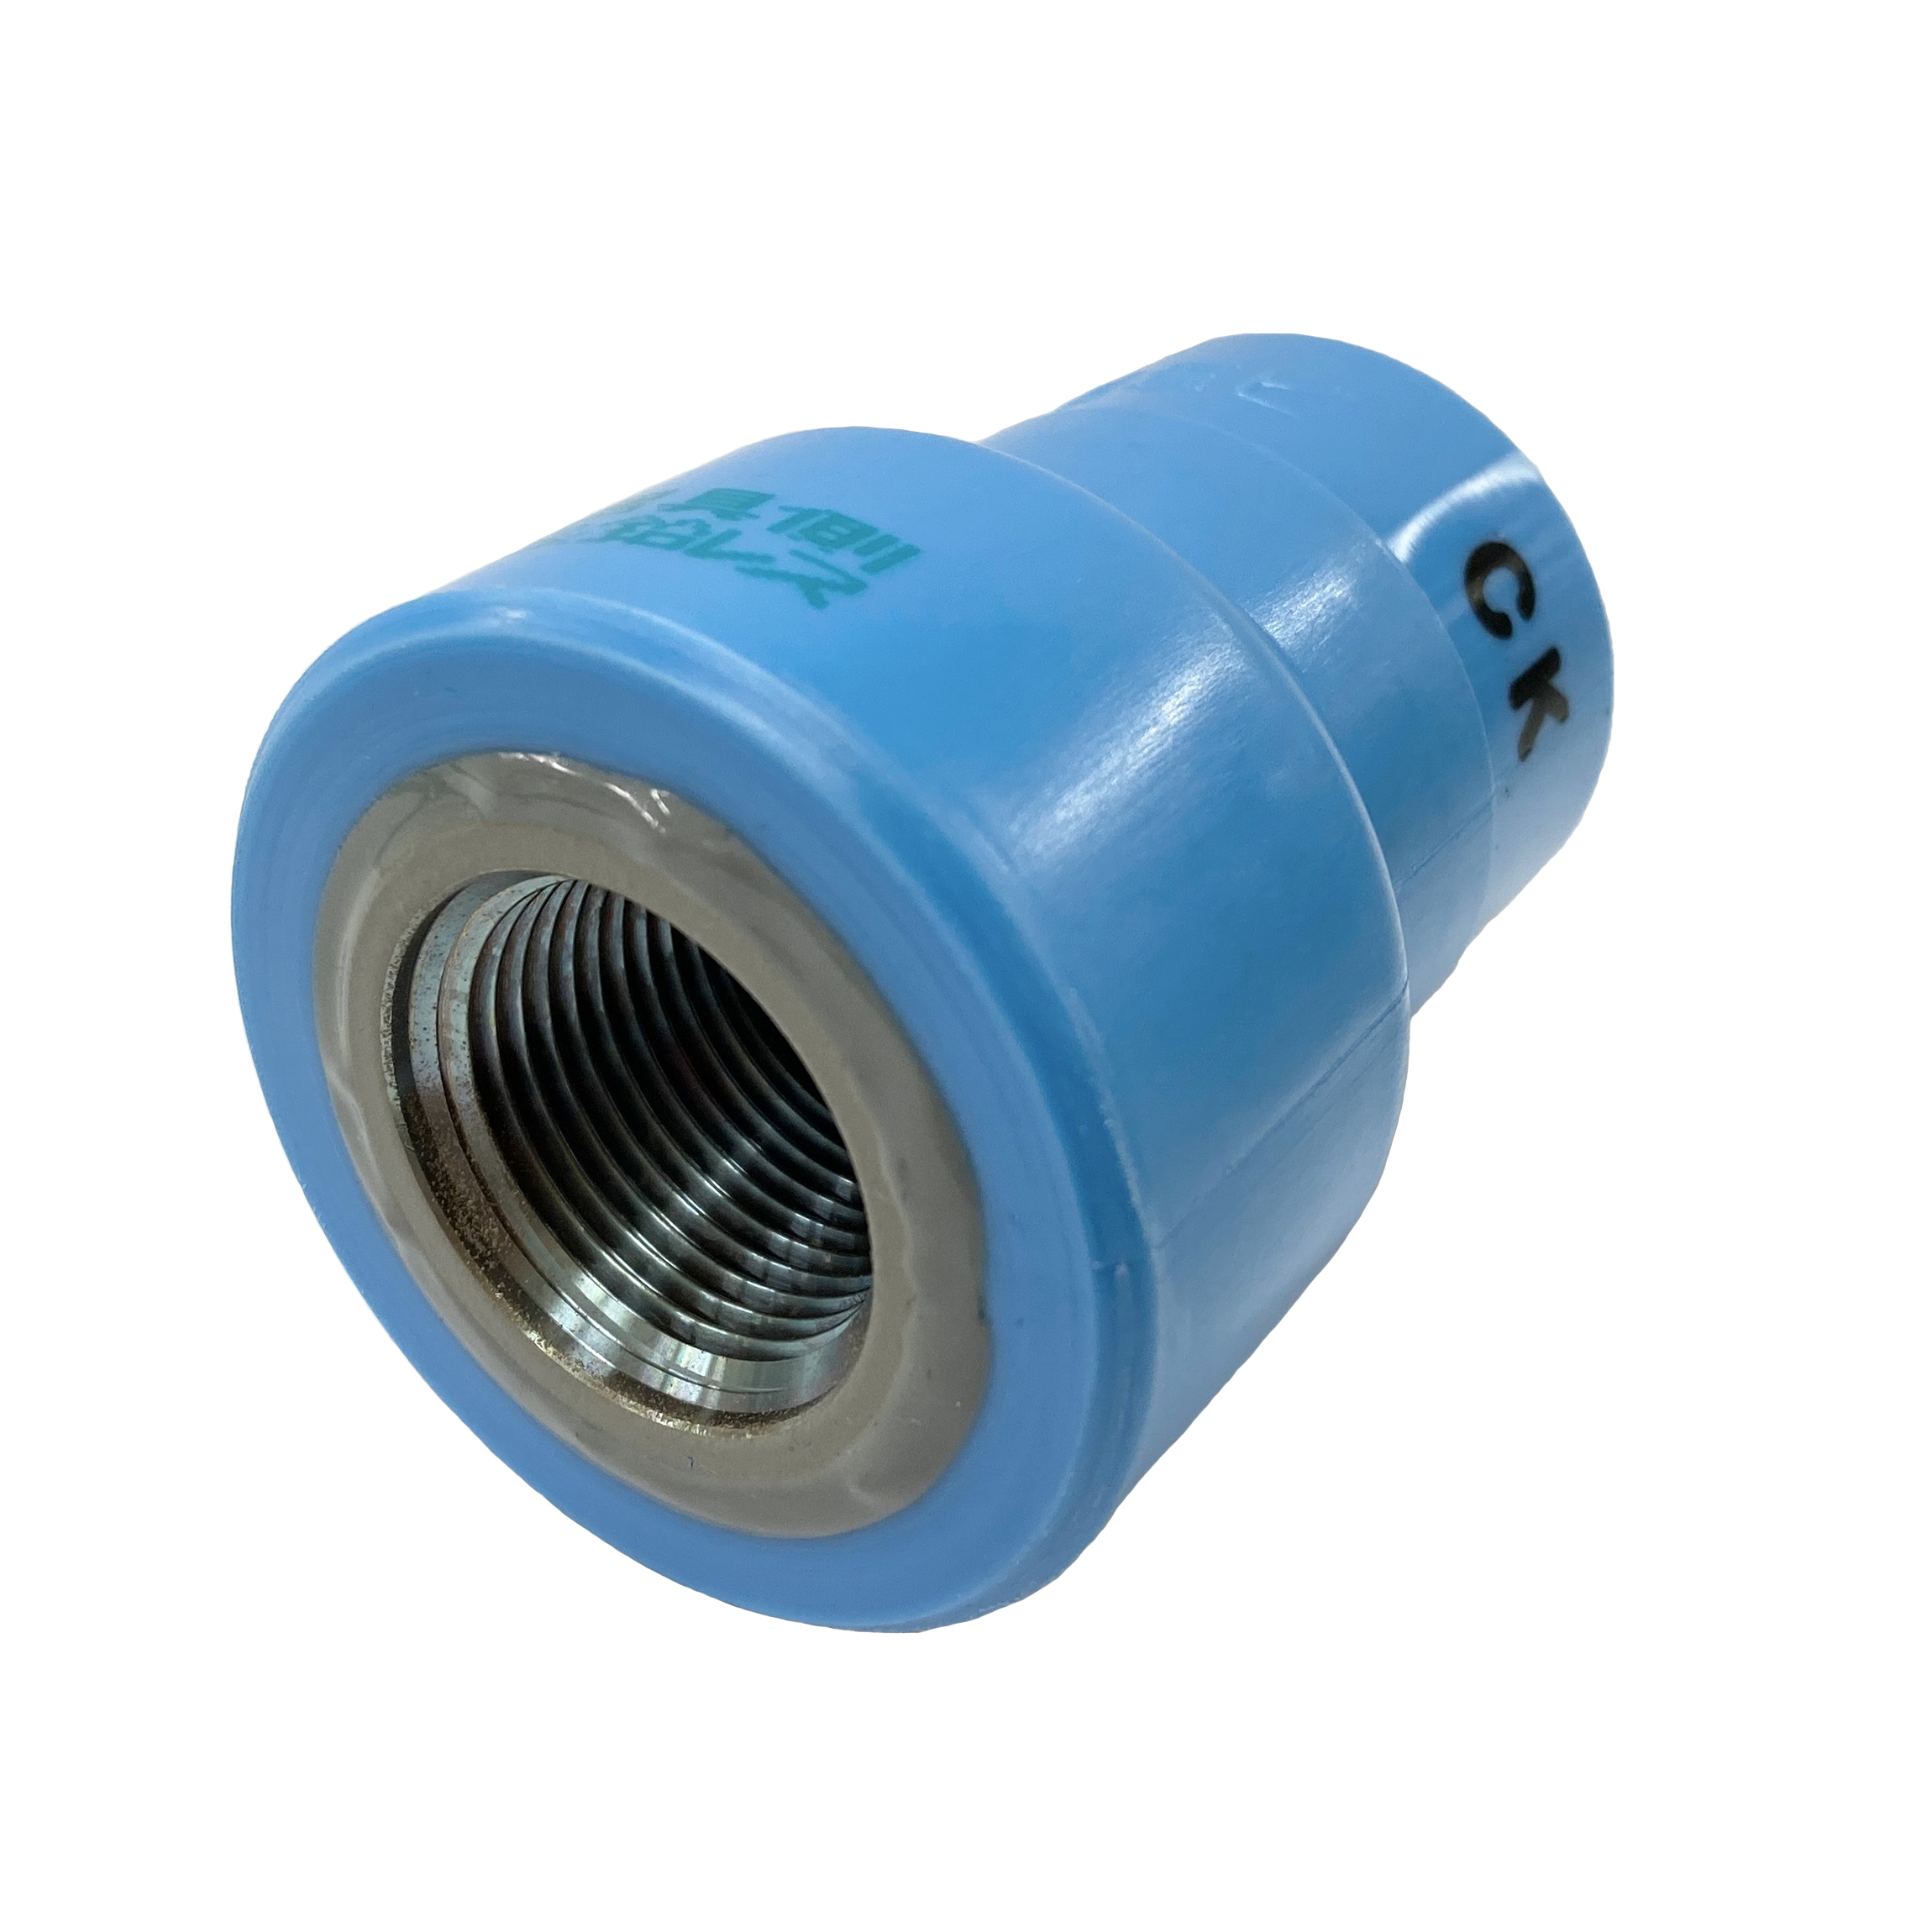 PC Core Fittings - for Fixture Connection - Fitting for Prevention of Contact Between Dissimilar Metals - Water Faucet Socket